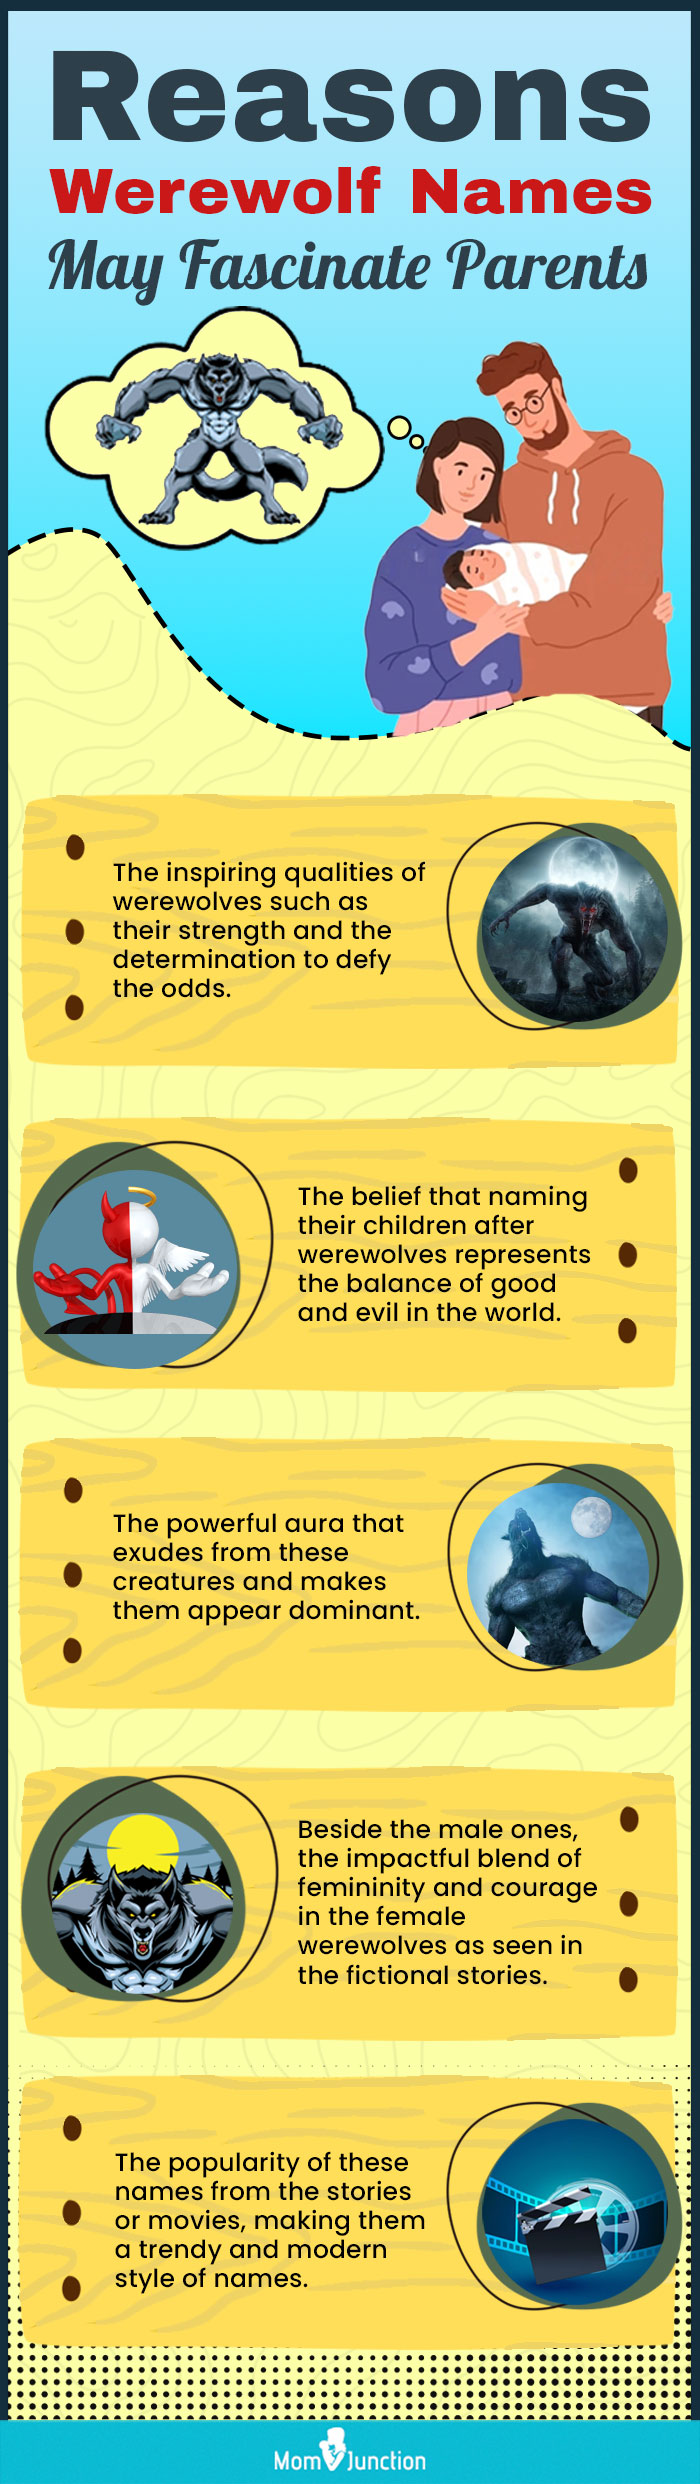 reasons werewolf names may fascinate parents (infographic)